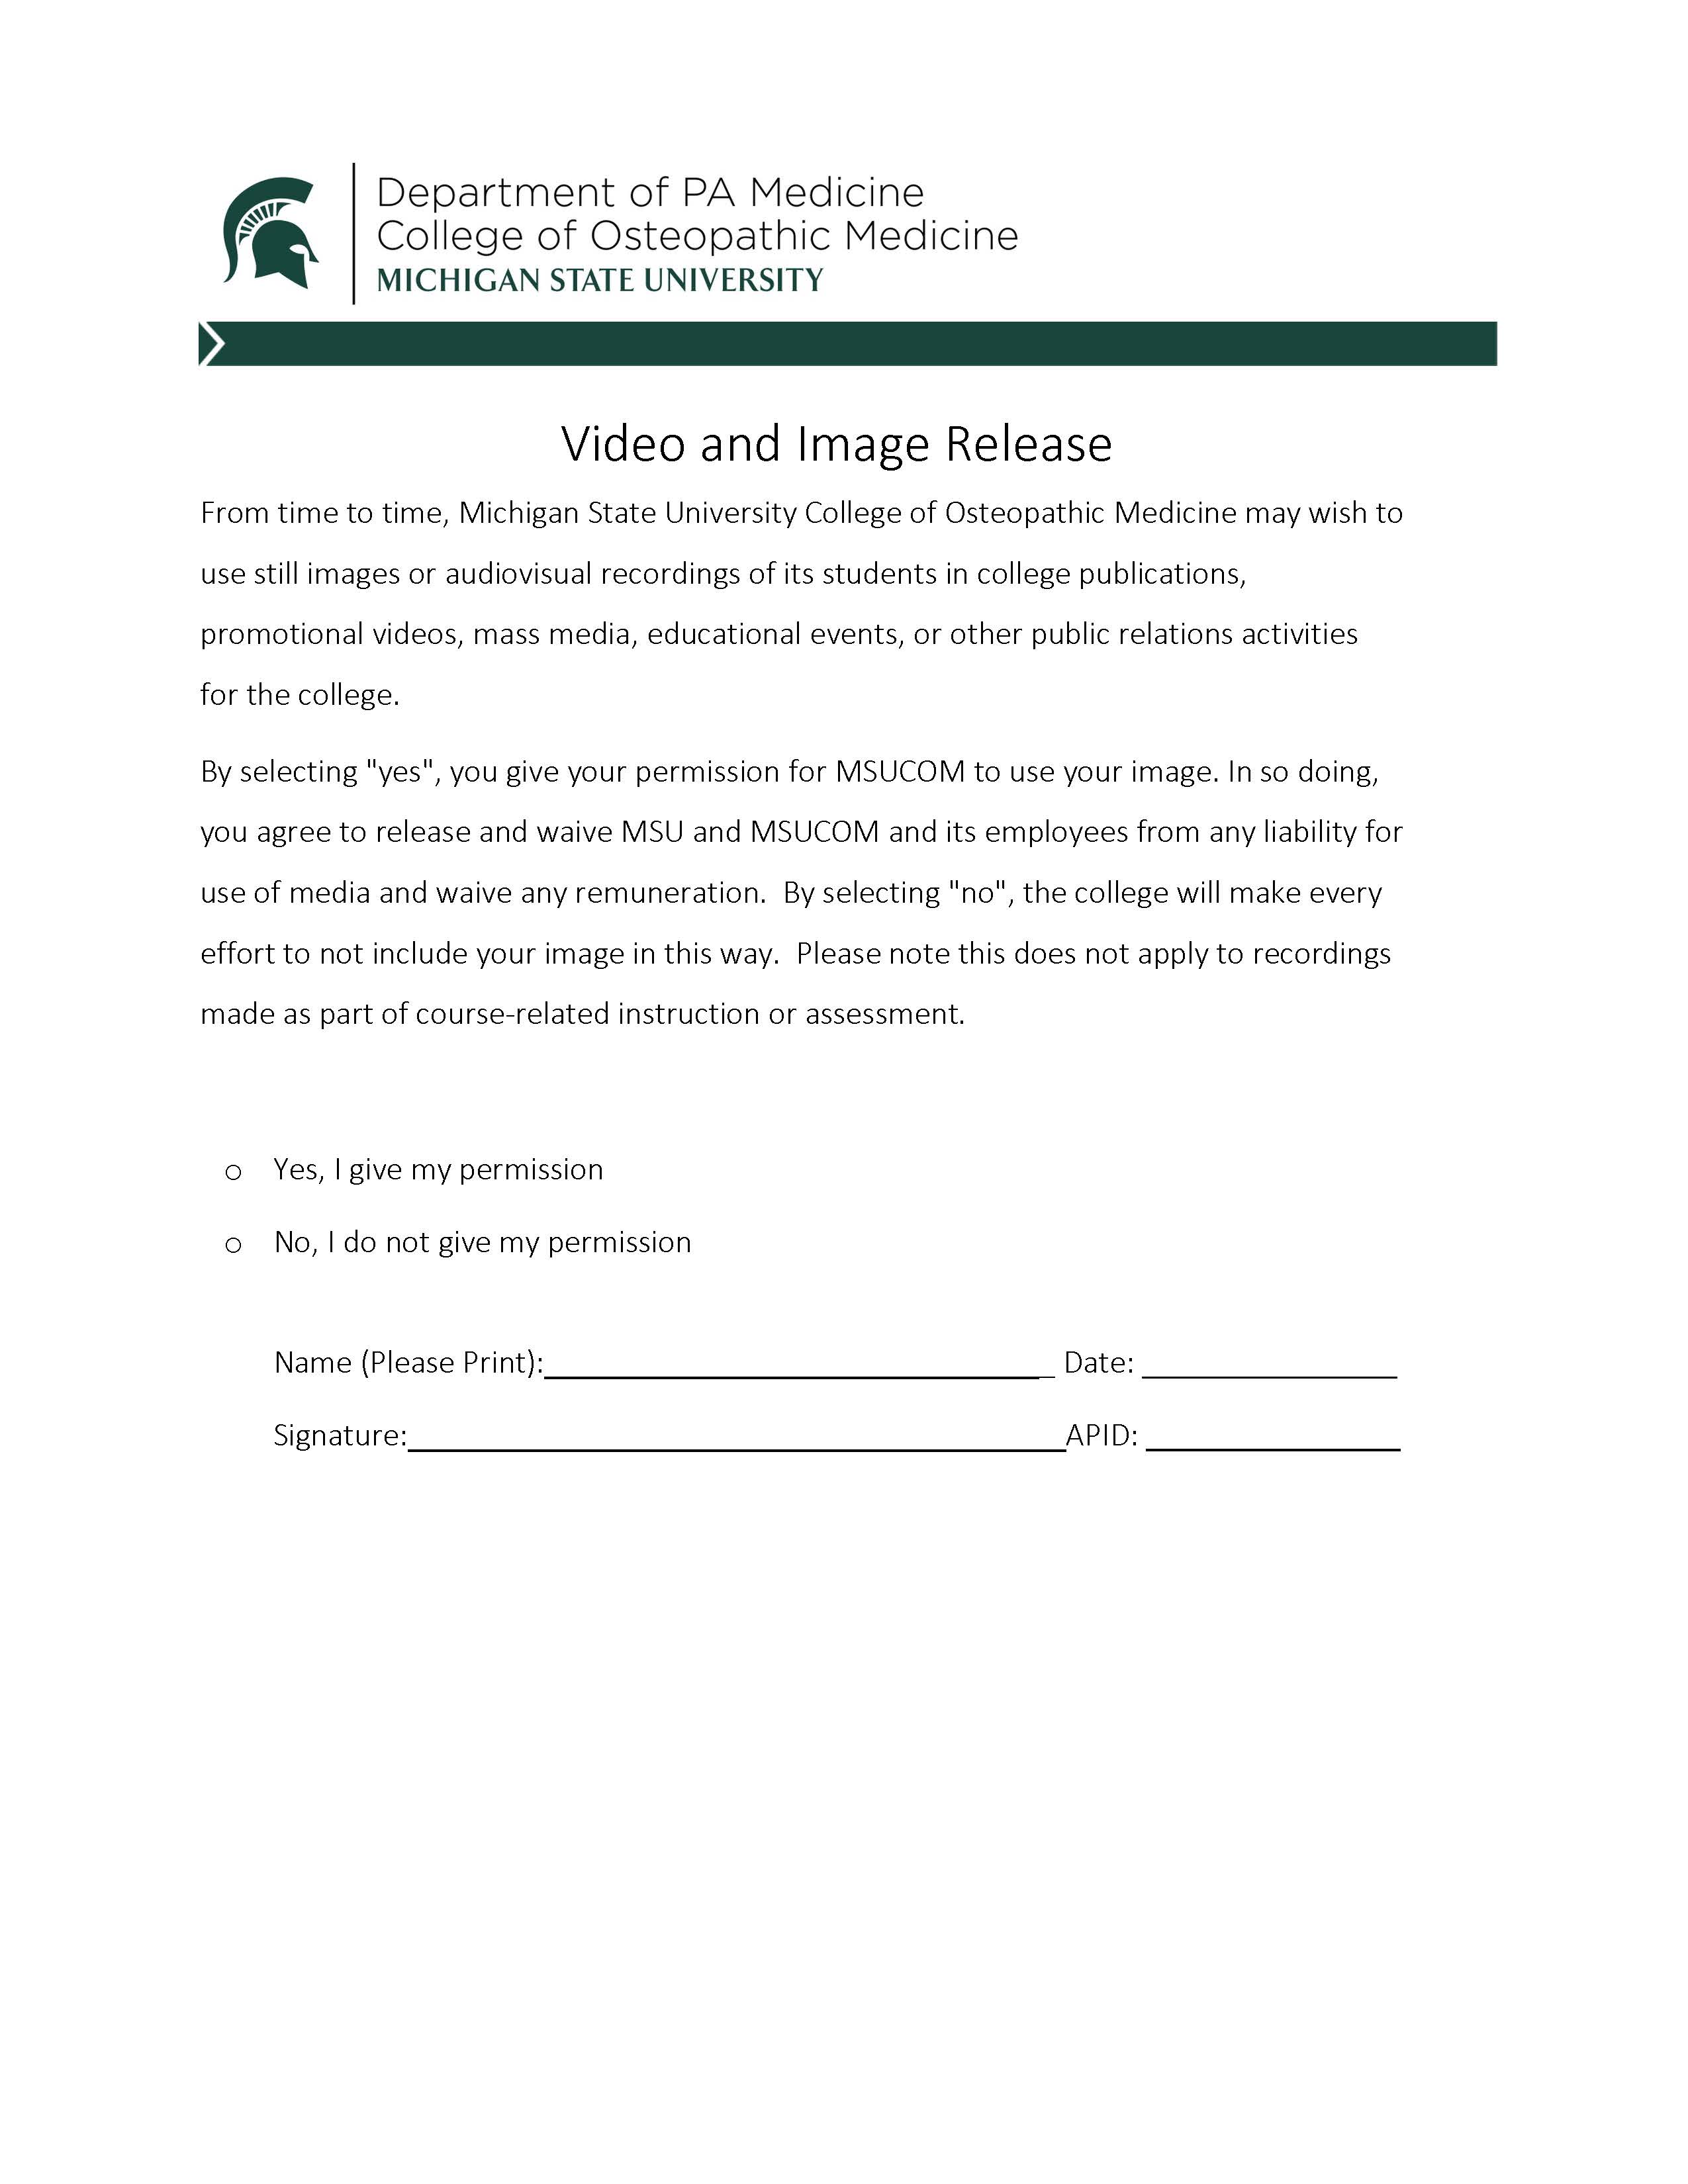 Photo Release Form. Contact PA for an accessible copy.